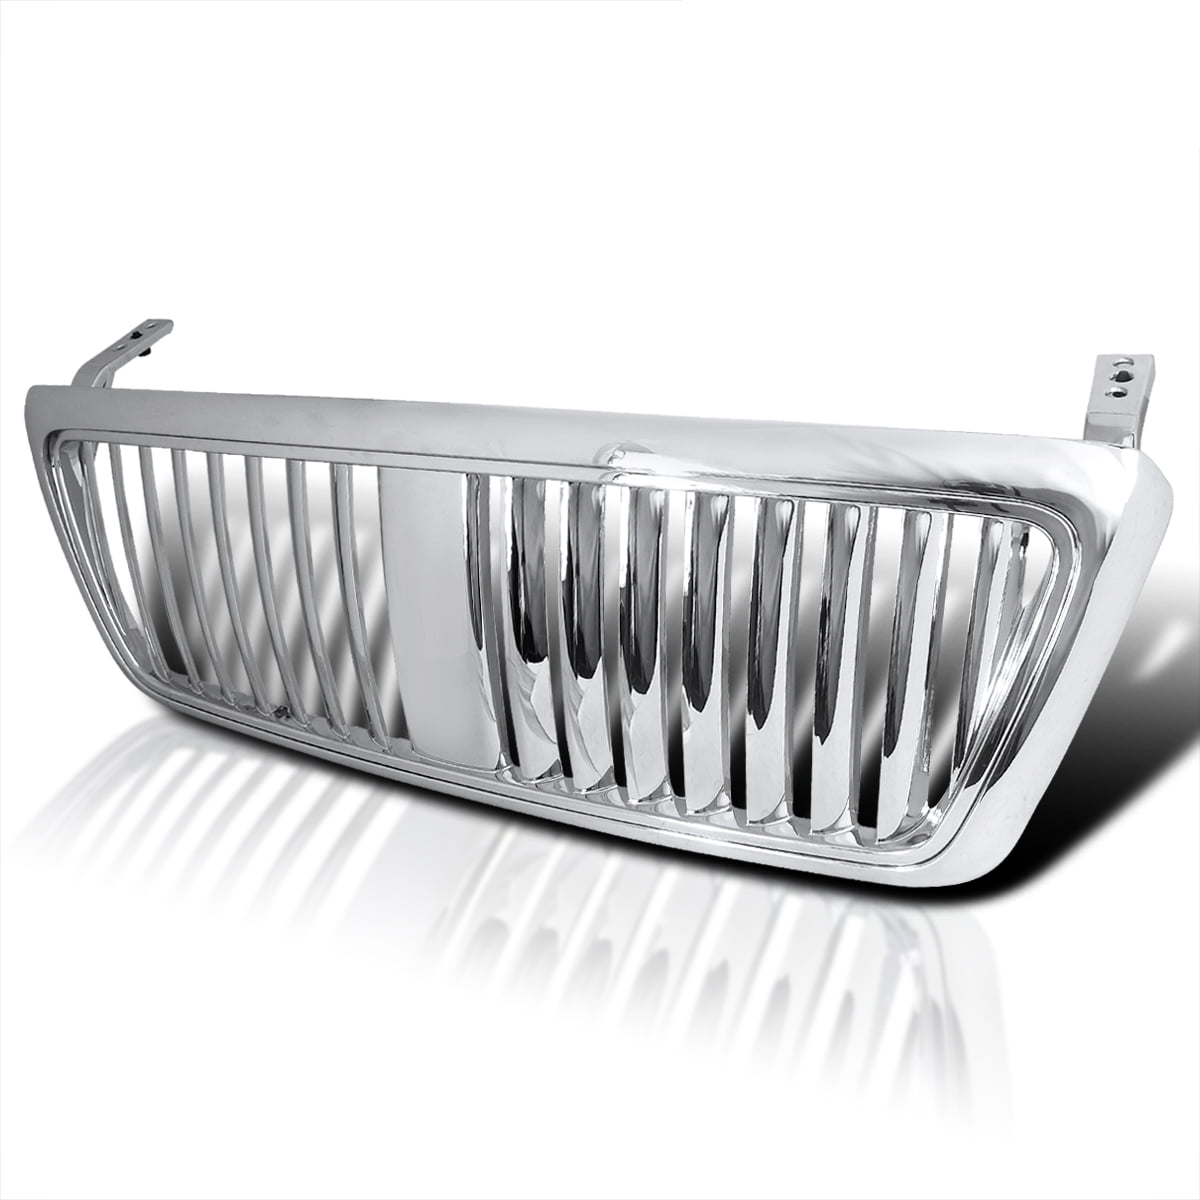 Spec-D Tuning Vertical Grill Grille Chrome Compatible with Ford F150  2004-2008, Lincoln Mark LT 2006-2008